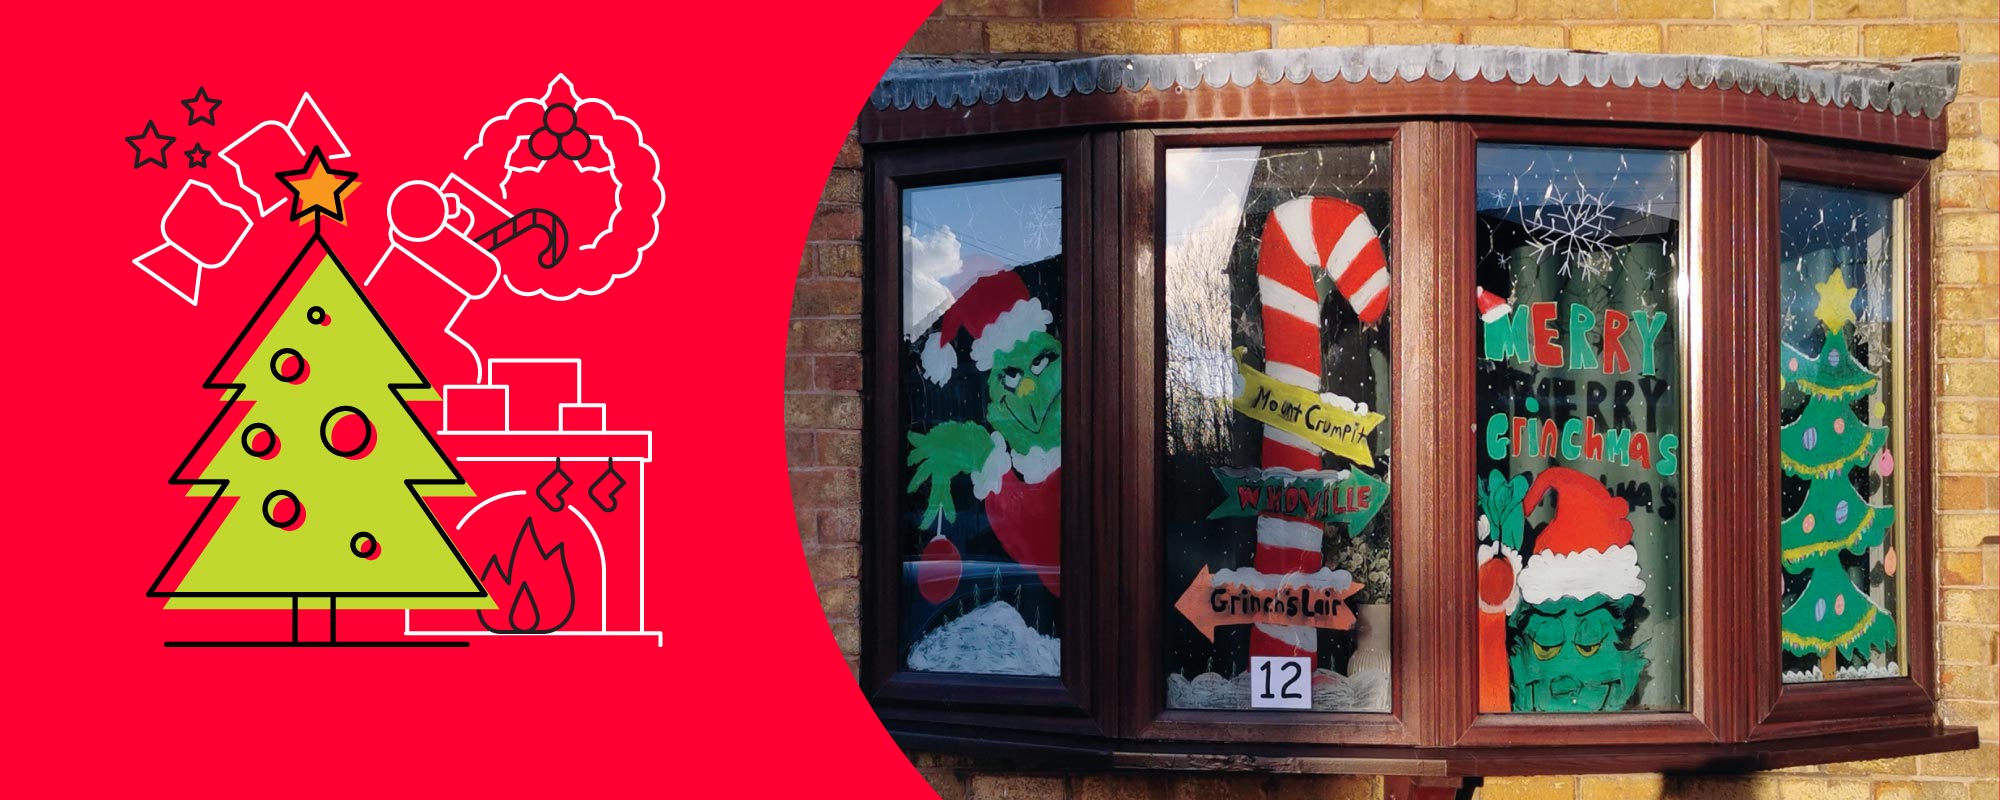 Let's see who won the Christmas Window Decorating competition!